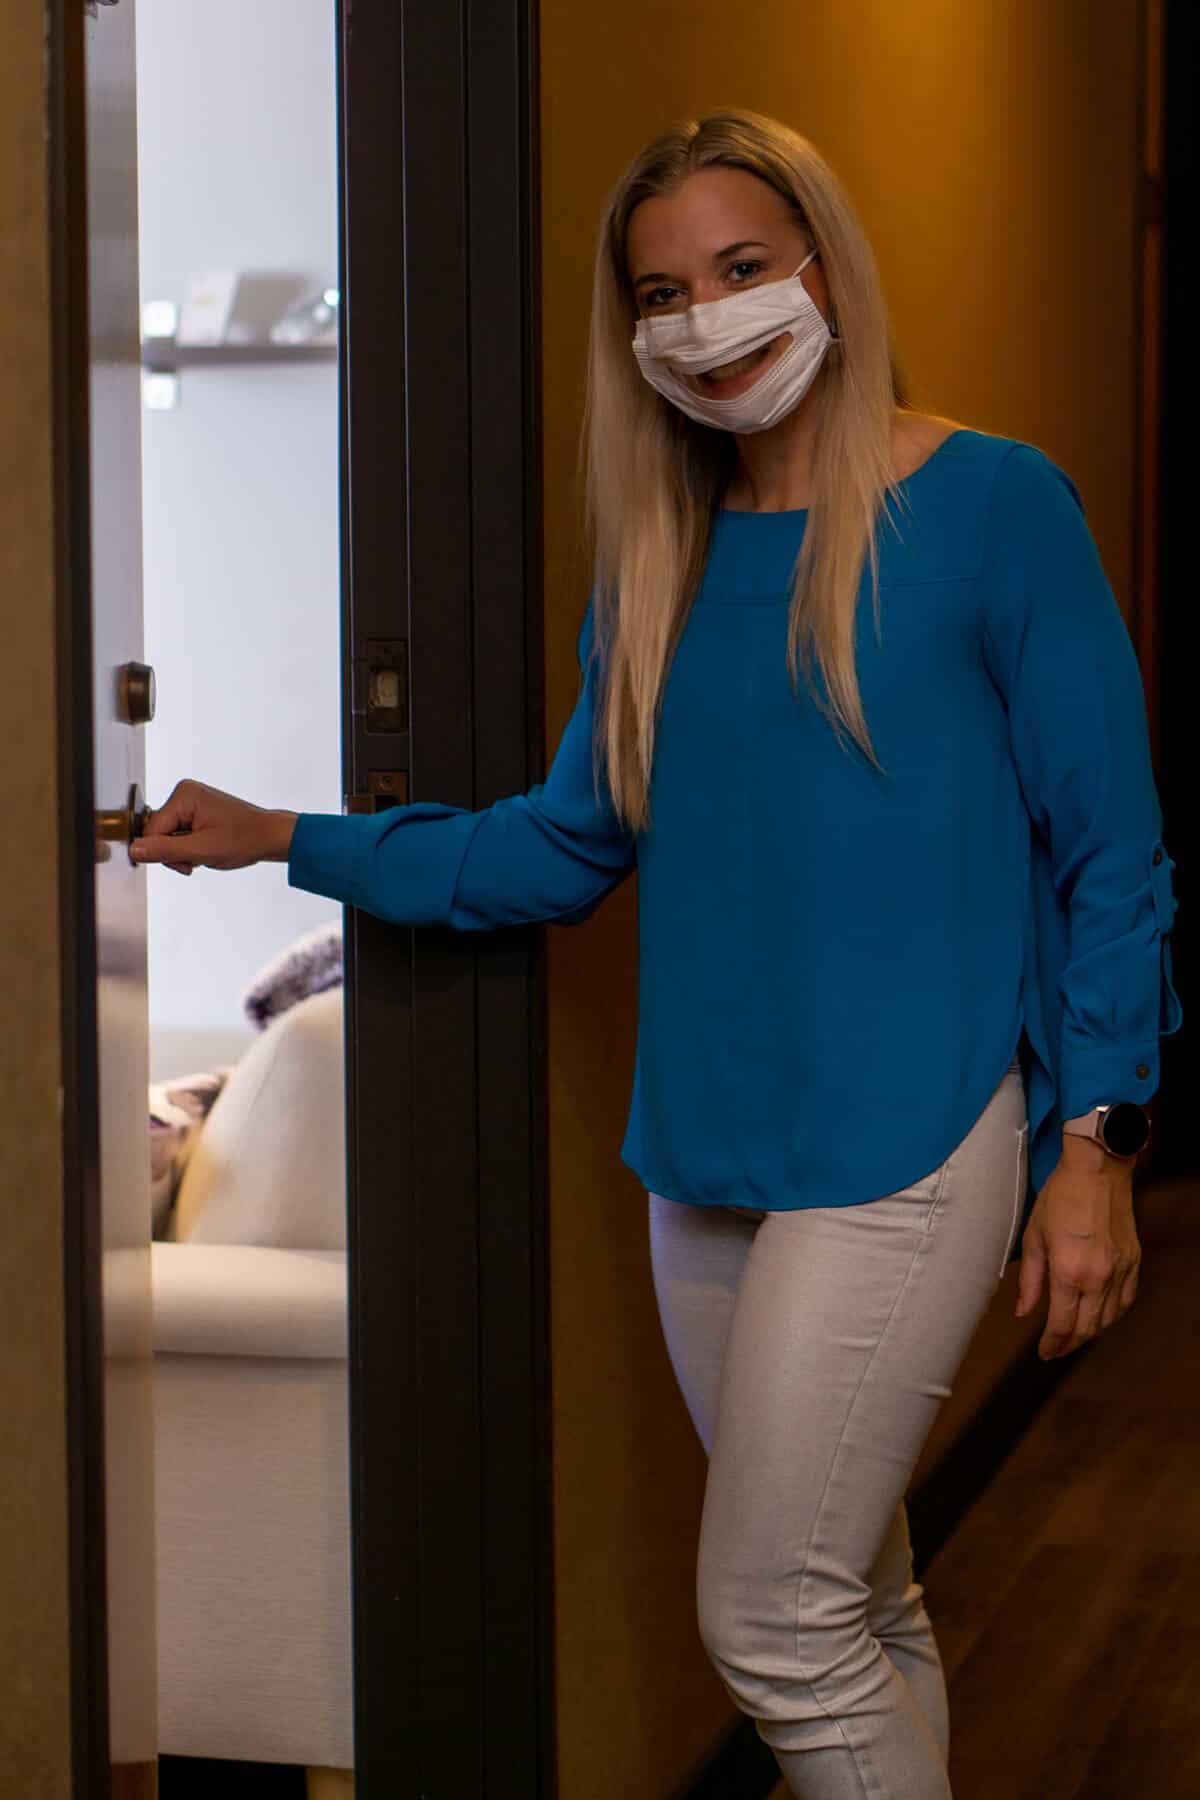 Woman Holds door open with mask on